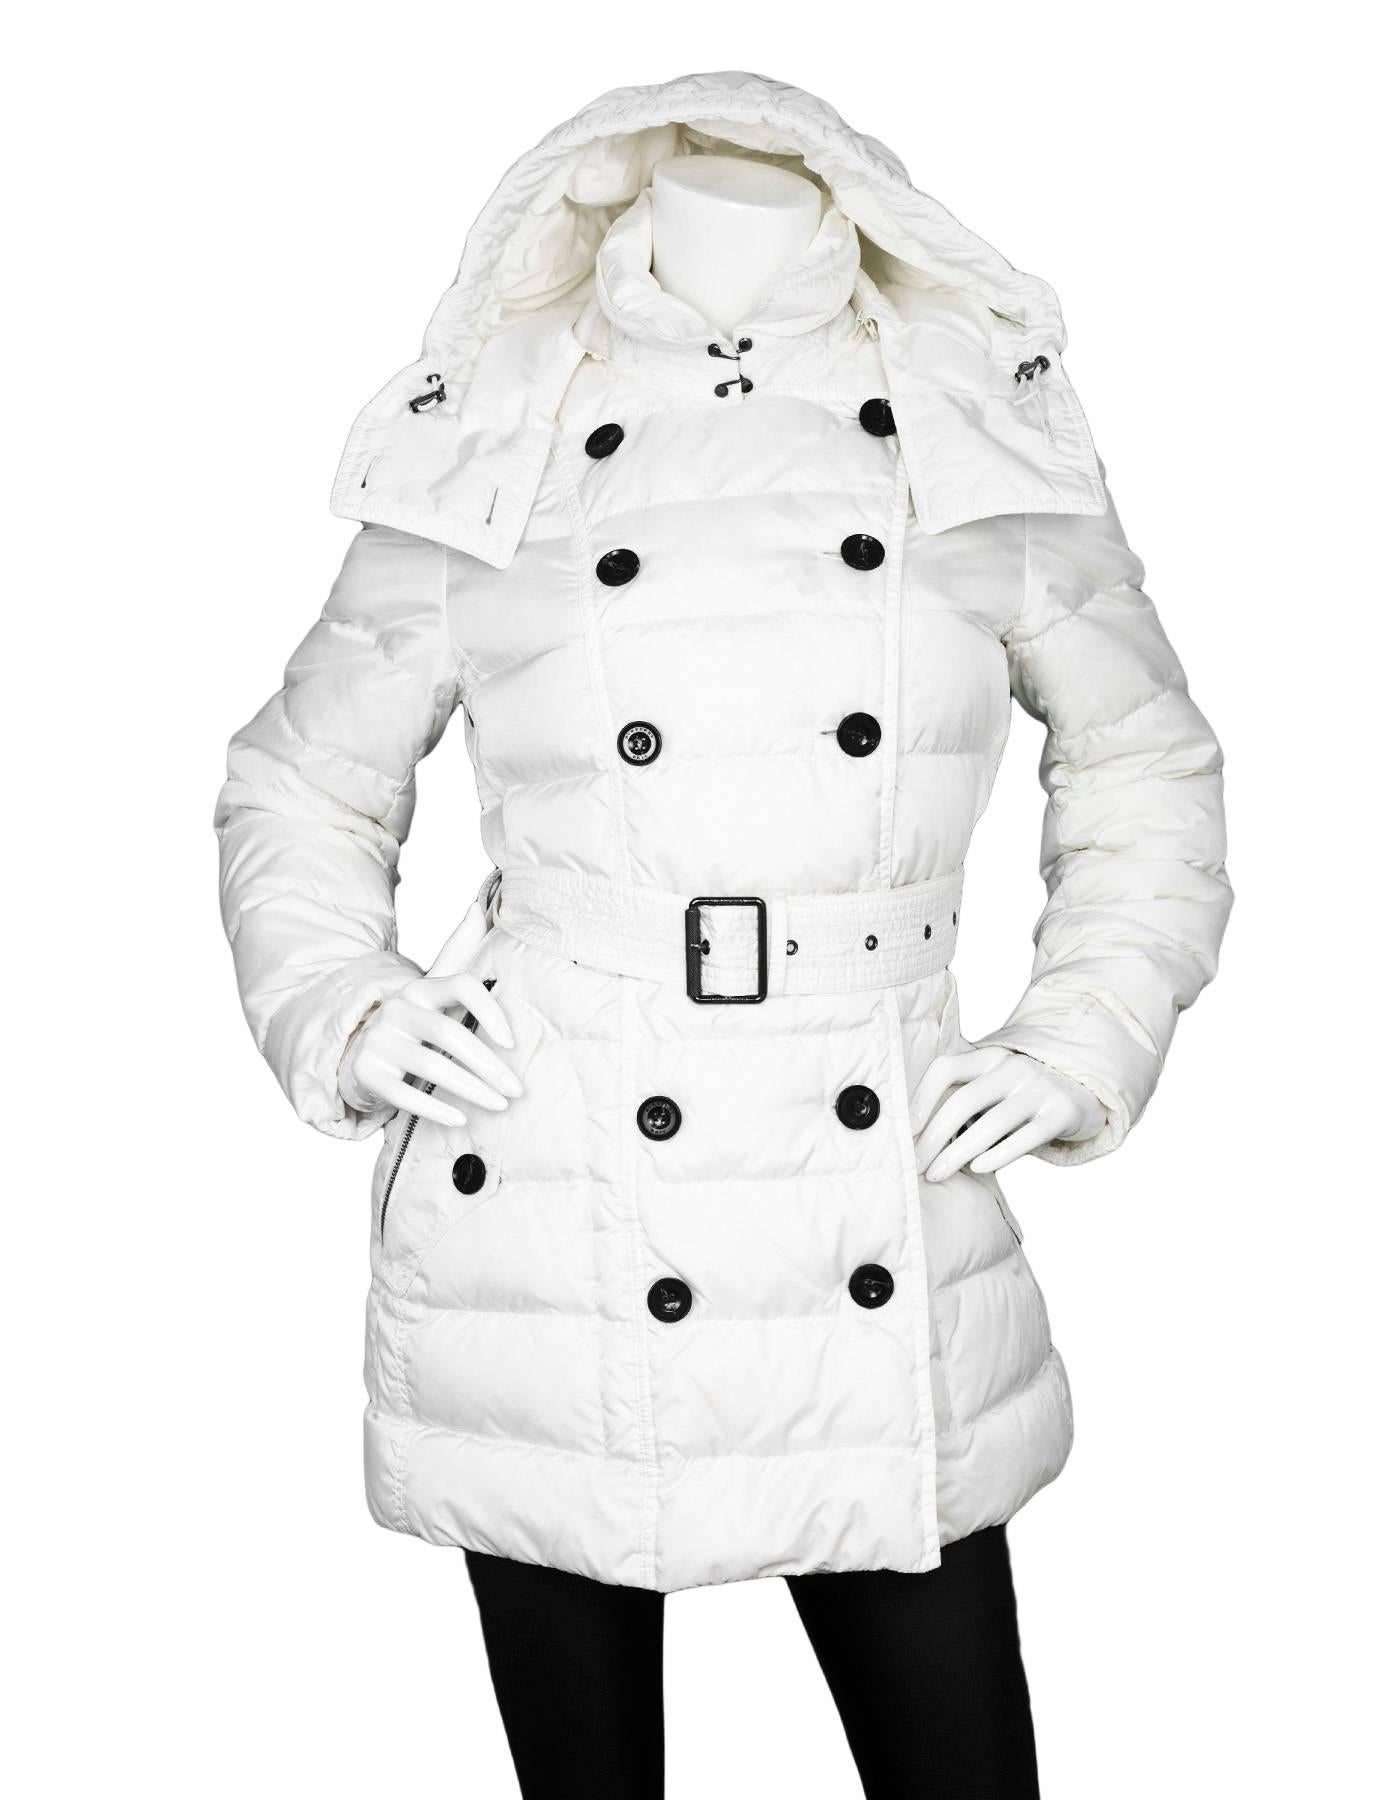 Burberry Brit White Puffer Coat 
Features optional waist belt

Made In: China
Color: White
Composition: 100% Nylon
Lining: Nova plaid, 100% polyester
Closure/Opening: Zip up front with double breasted button down closure
Exterior Pockets: Four hip